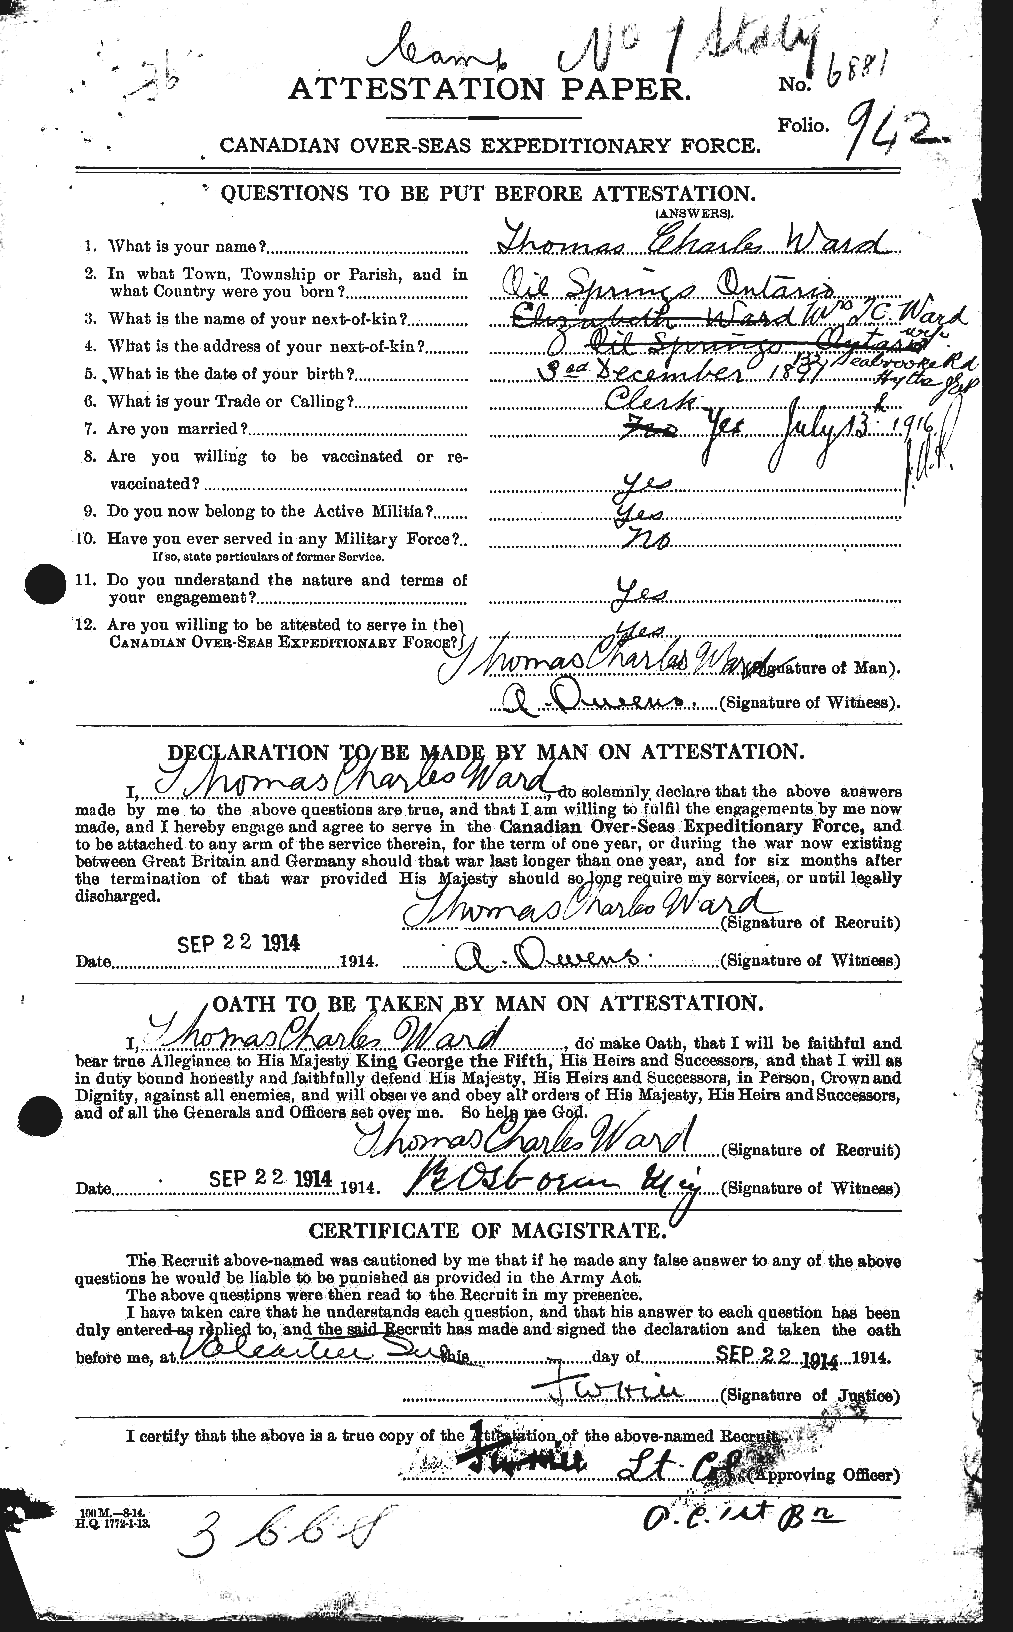 Personnel Records of the First World War - CEF 659722a